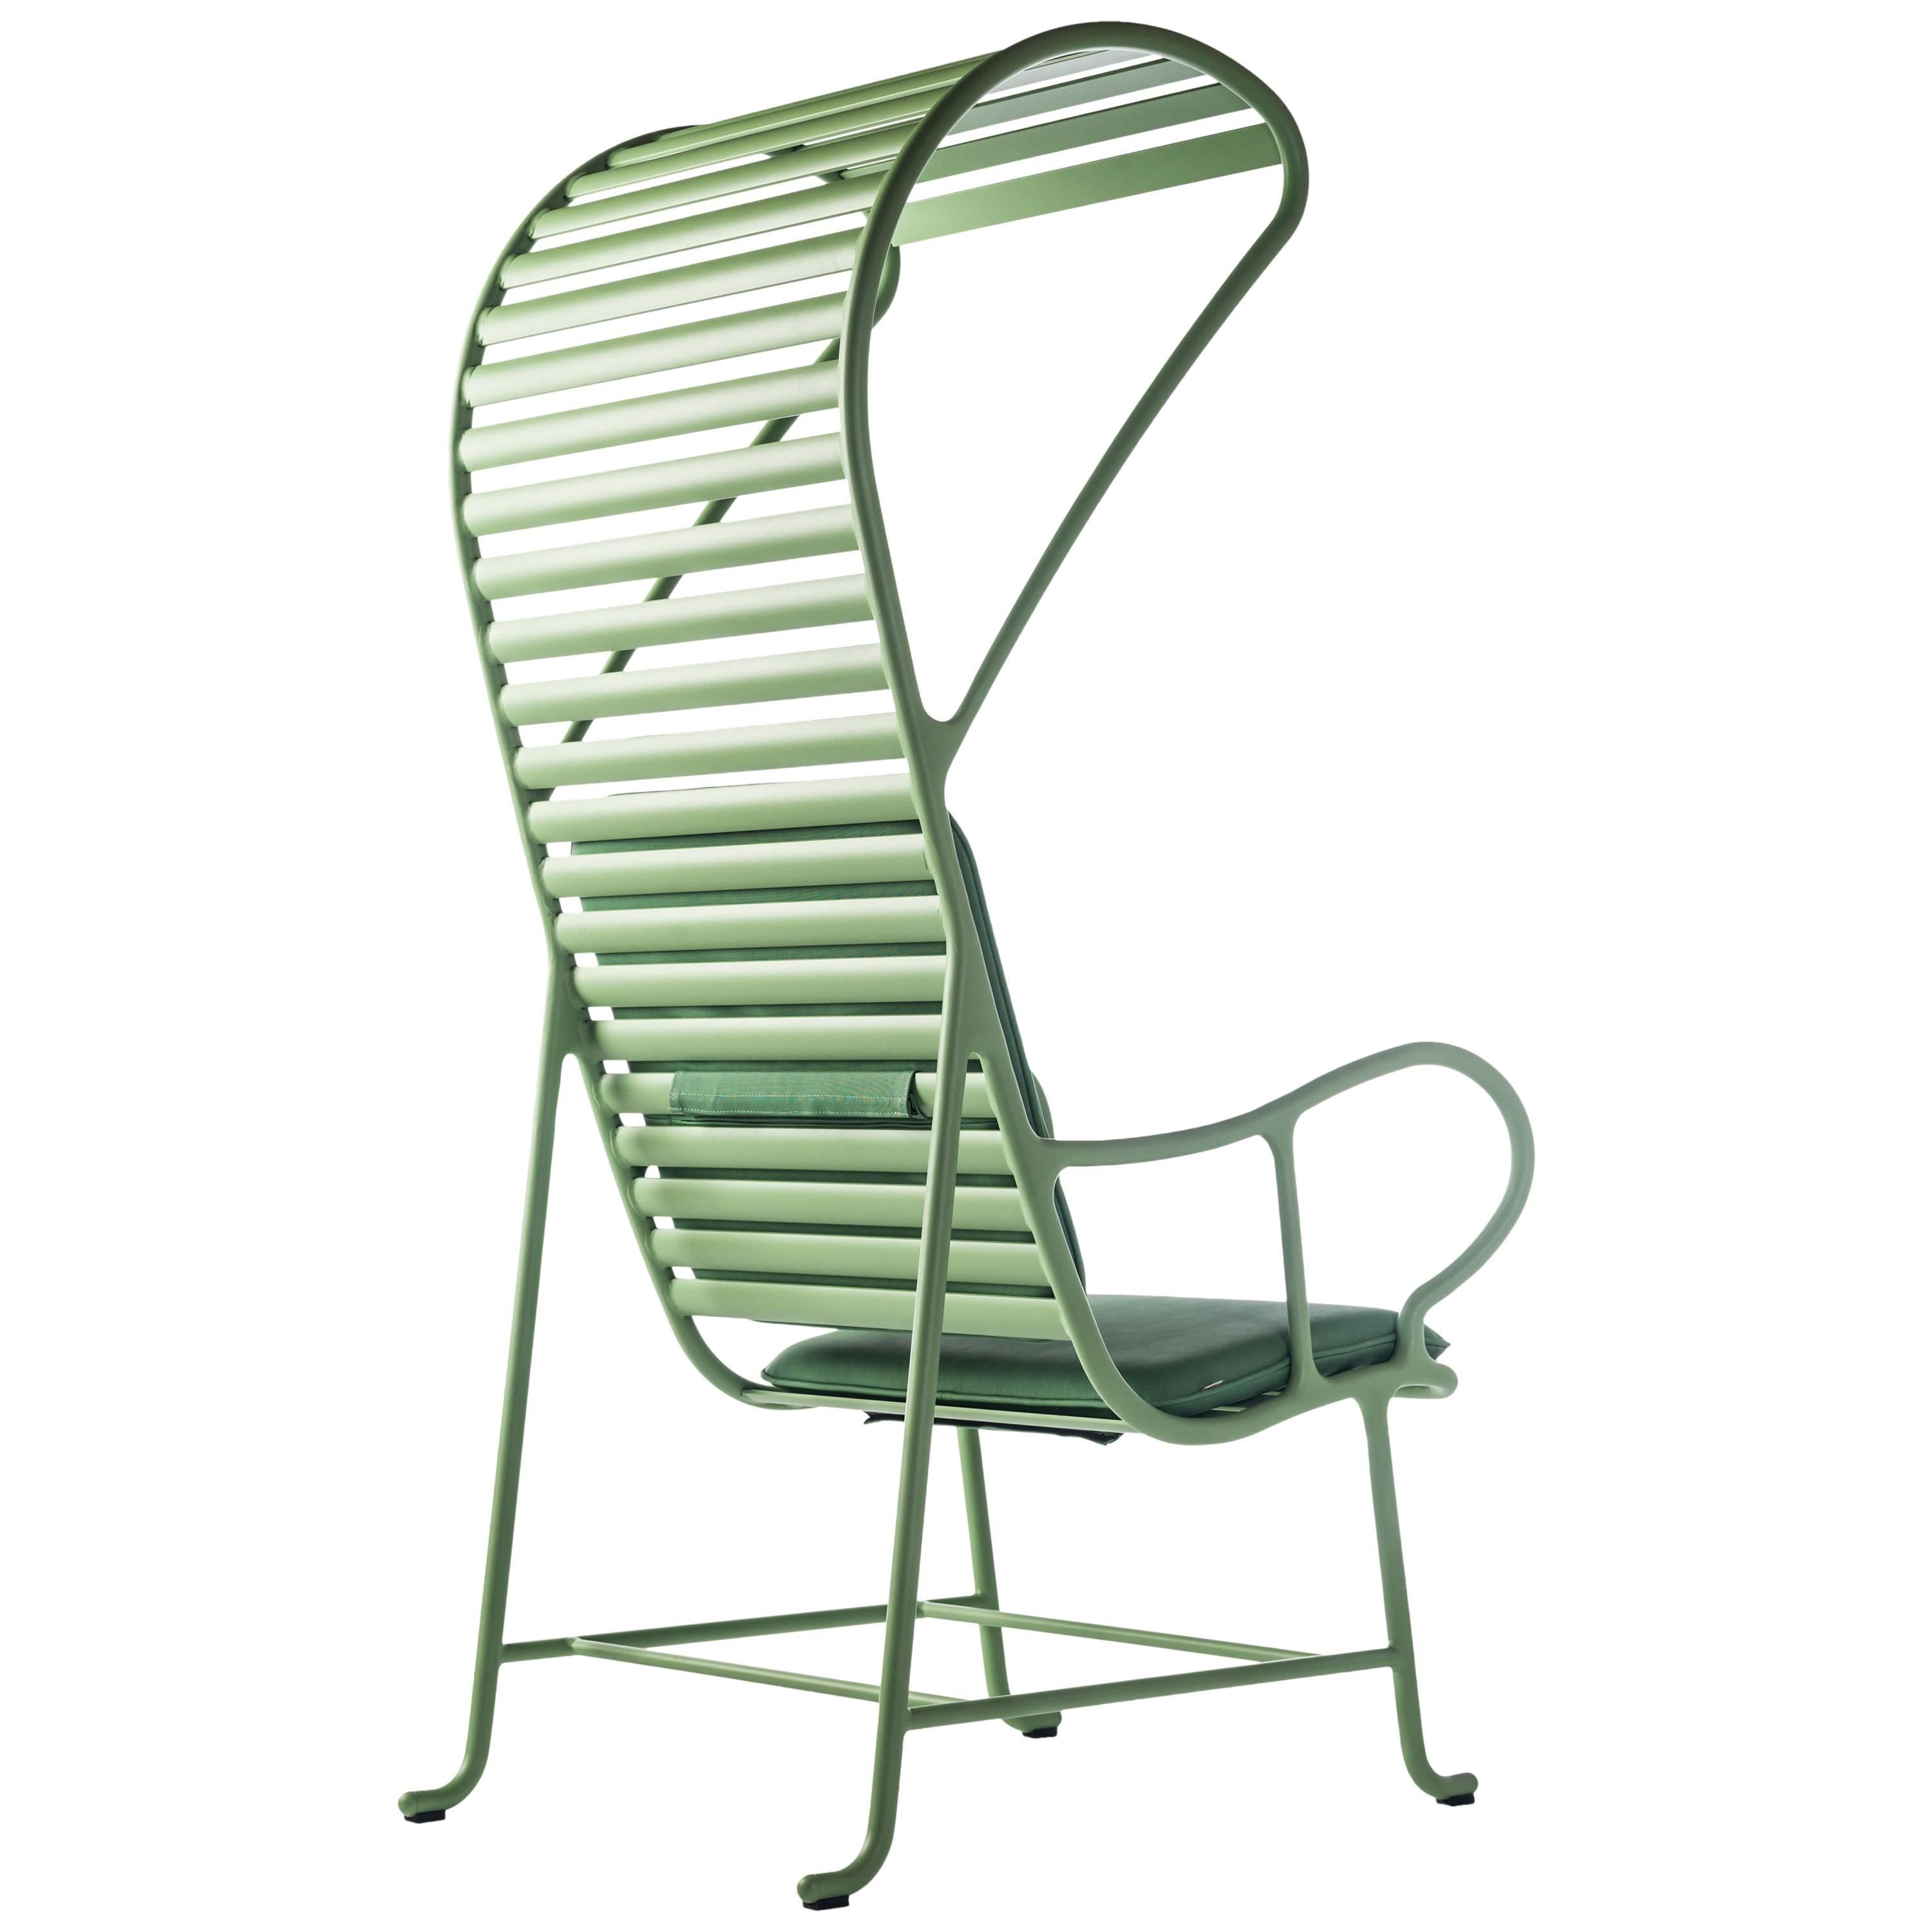 The Gardenias collection is the second largest collection by Jaime Hayon for BD.

Structure made of cast and extruded aluminium. Powder-coated green (RAL 6021) with Alesta by Axalta.
Removable upholstery and removable cushion covers, waterproof and